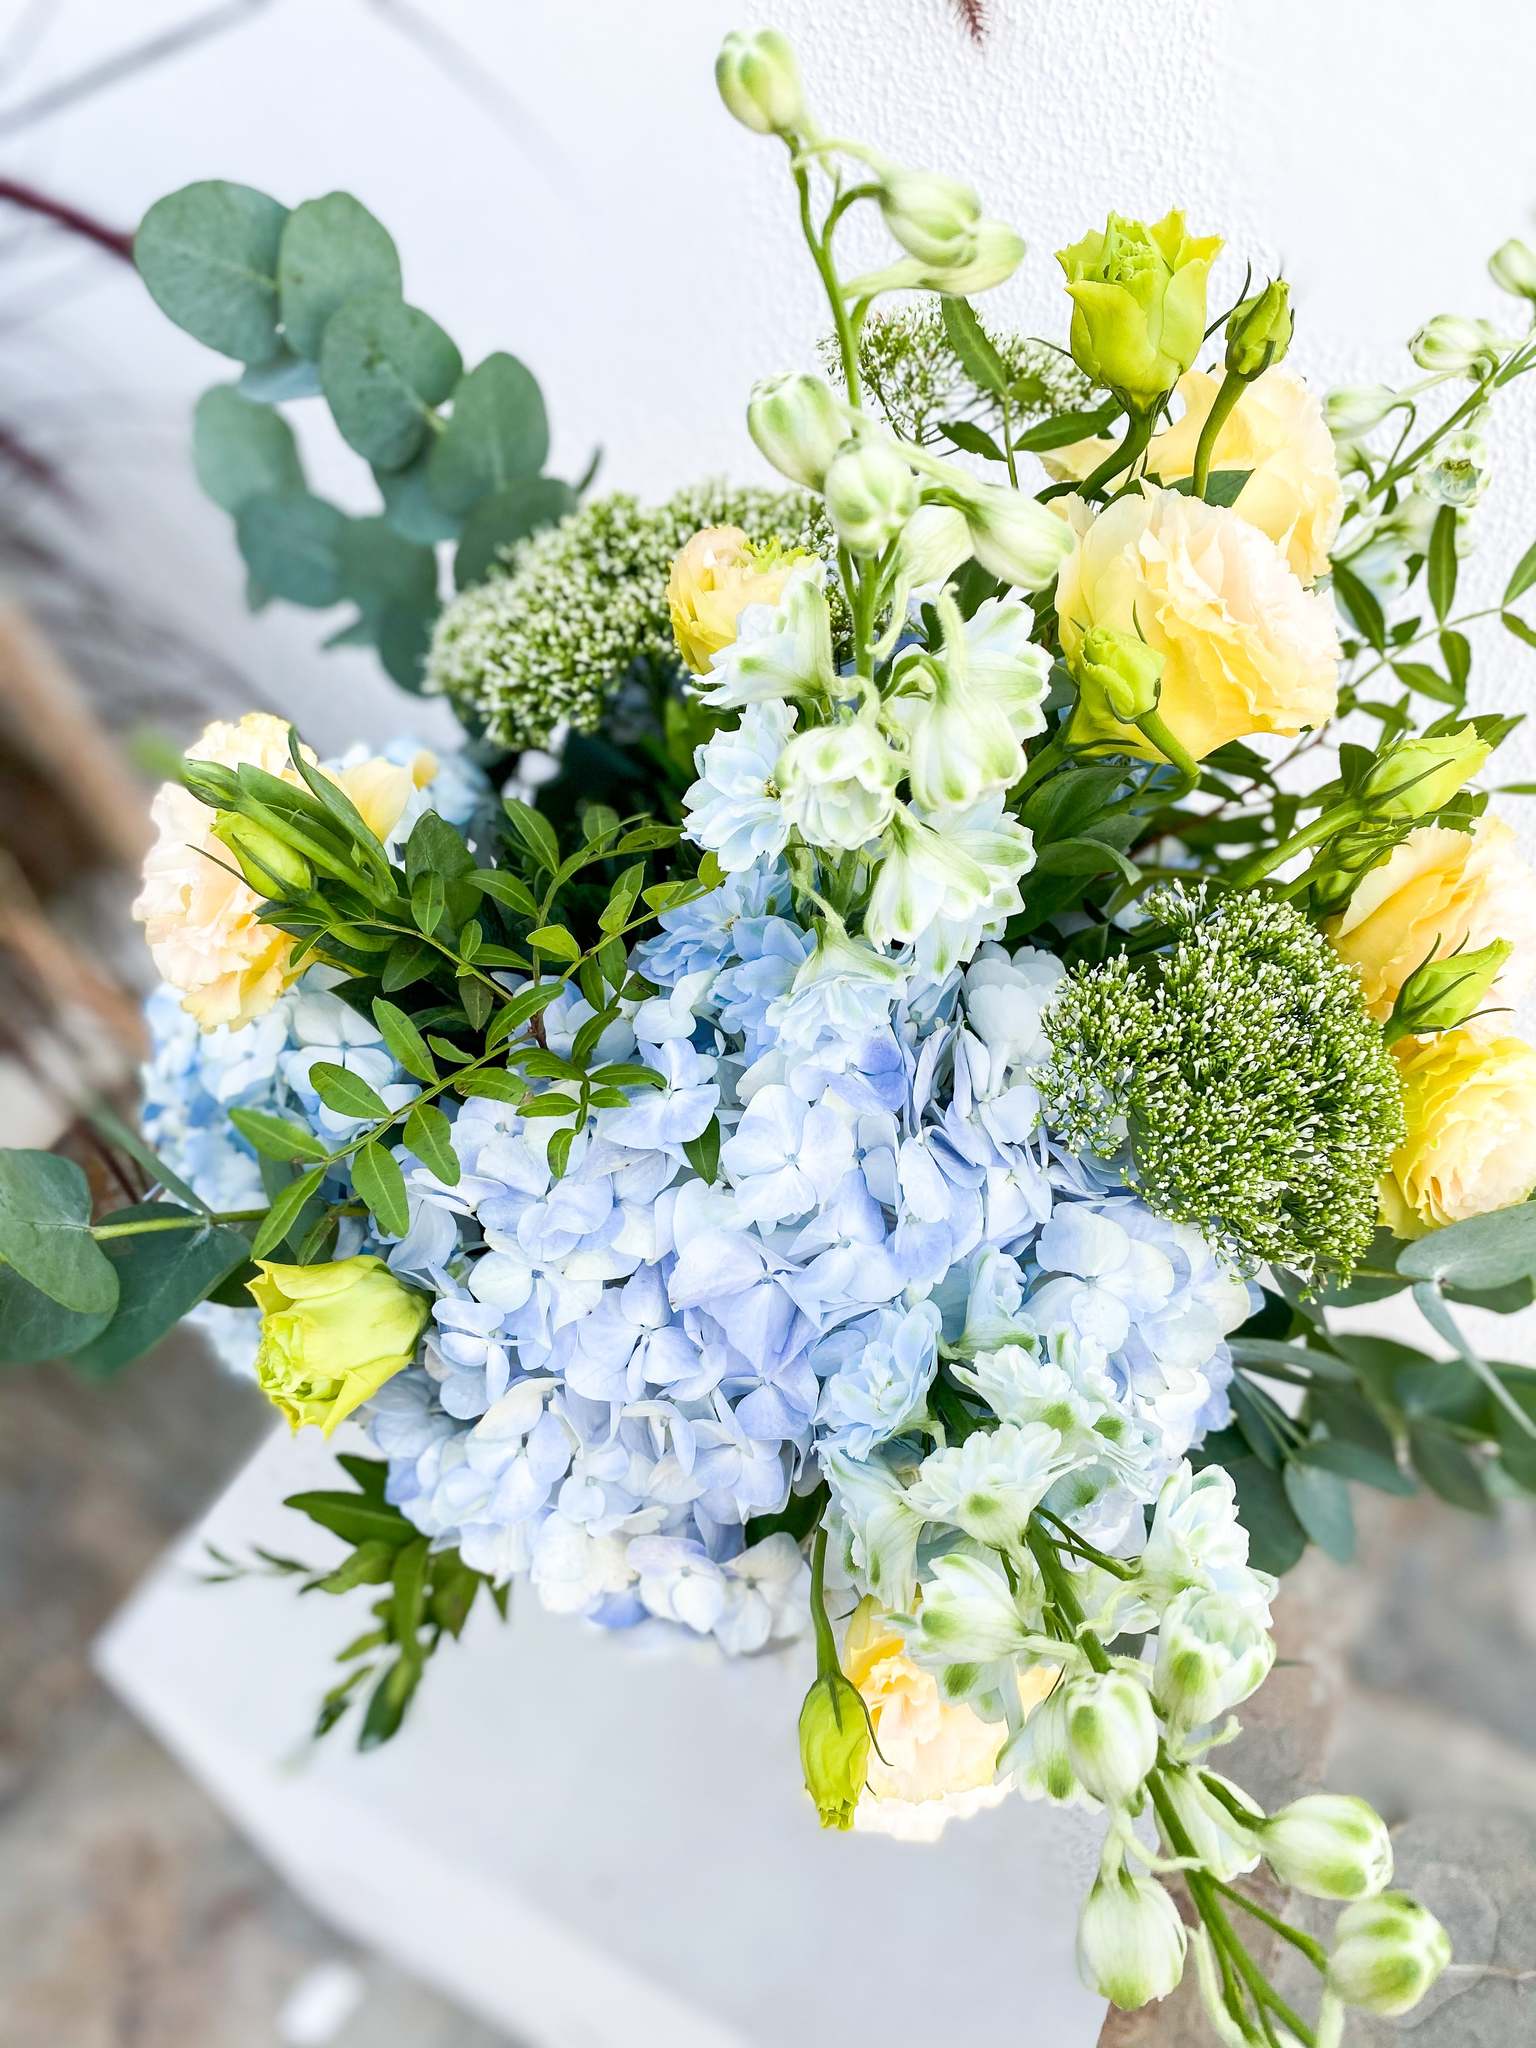 Valentine bouquet by Margot Floral Design. A fresh flower bouquet composed of Pale Yellow Roses, White Delphinium, Blue Hydrangea, and Eucalyptus. Large Size.